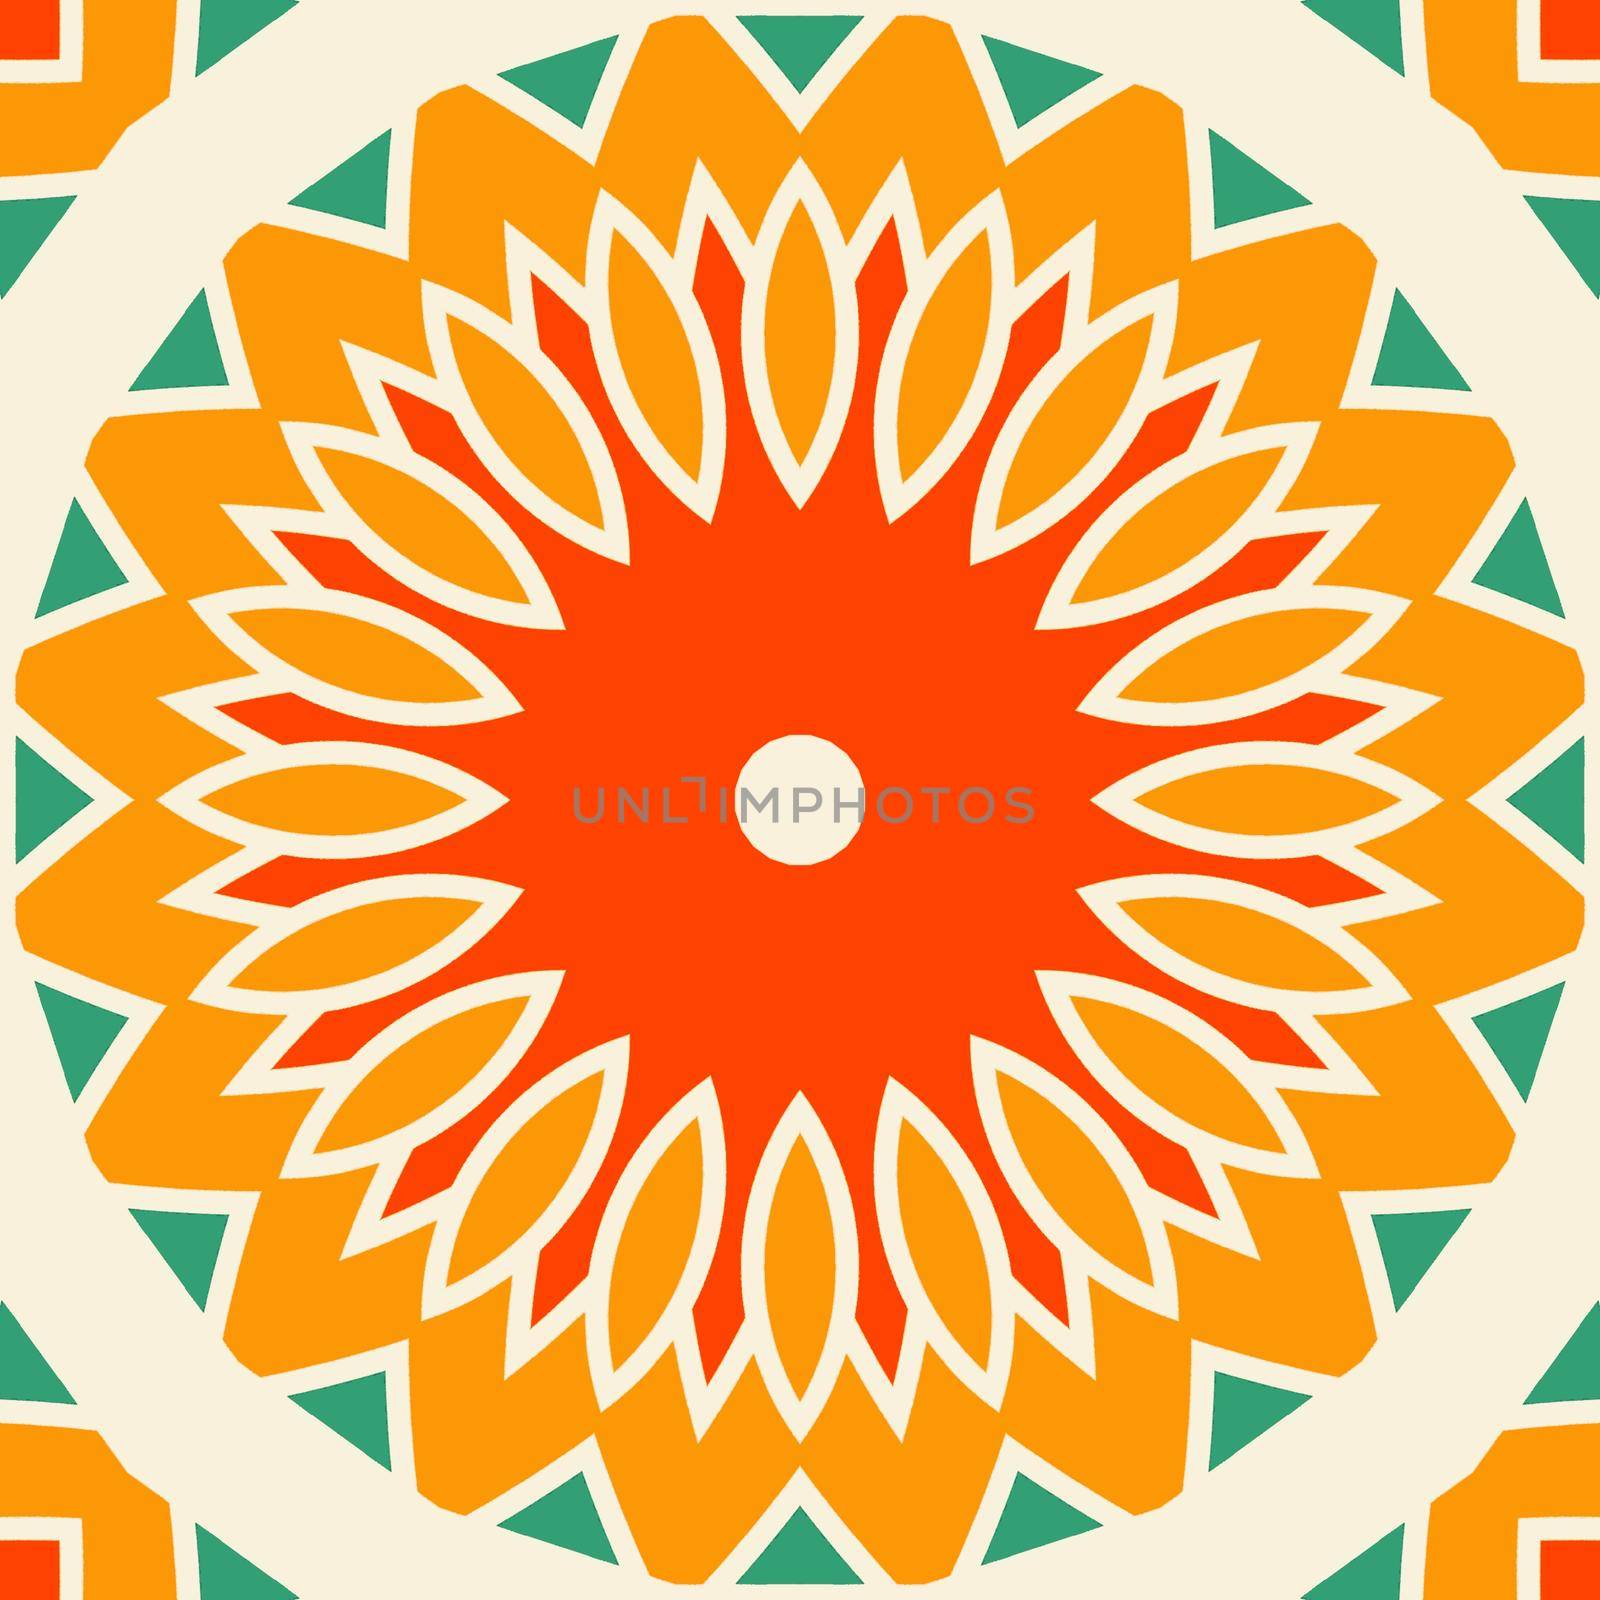 Beautiful shades of orange color symmetrical patterns illustration designs. Concept of home decor and interior designing